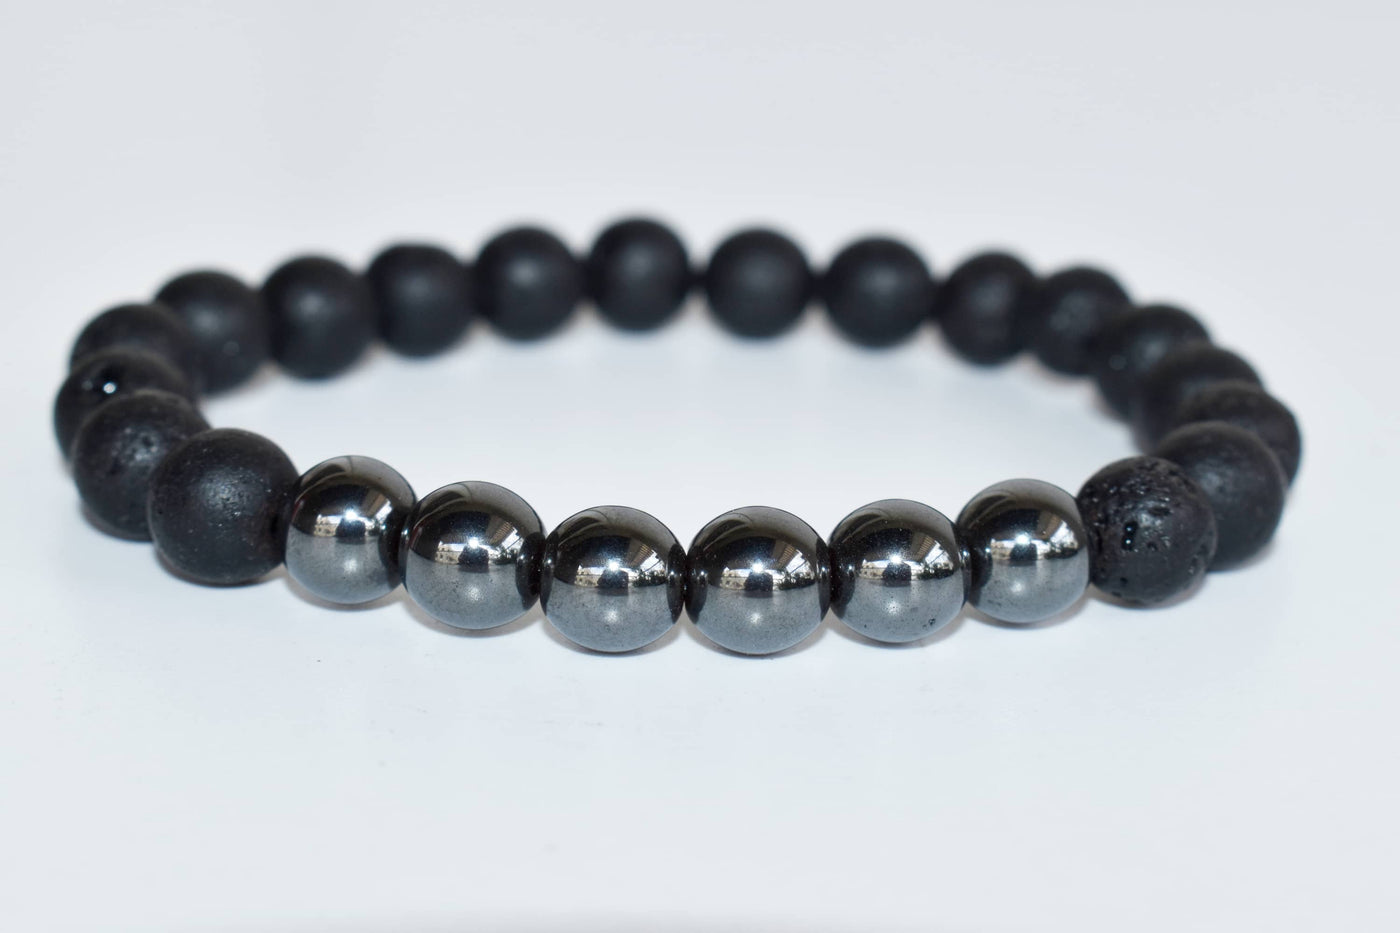 Lava Diffuser Bracelet, Lava with Hematite Beads Diffuser Jewelry, Aromatherapy, Essential Oil Bracelet, Spiritual Gift, Yoga Gift for Her,